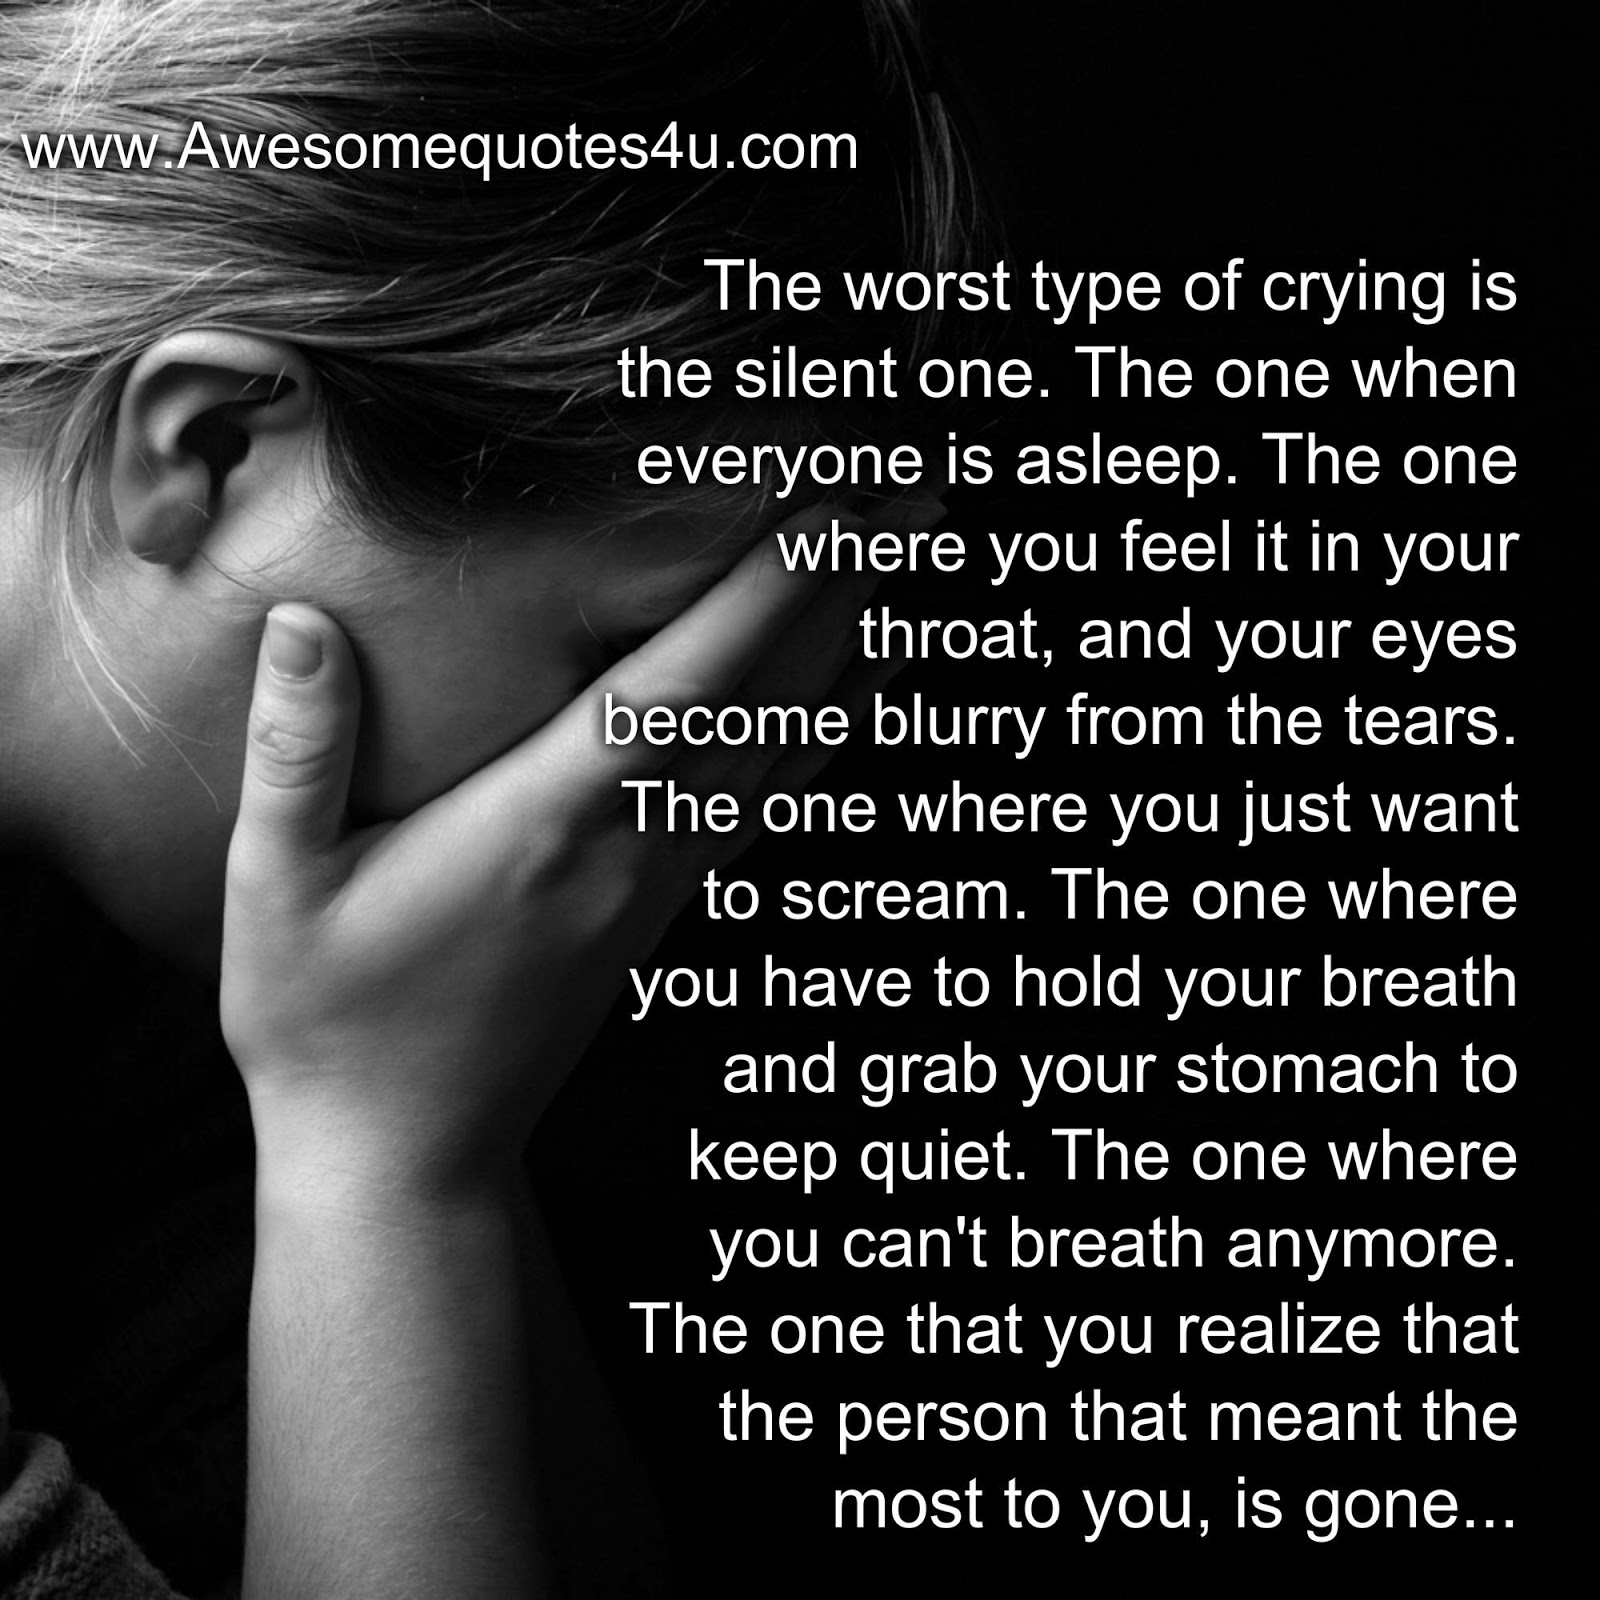 Awesome Quotes The worst type of crying is the silent one.